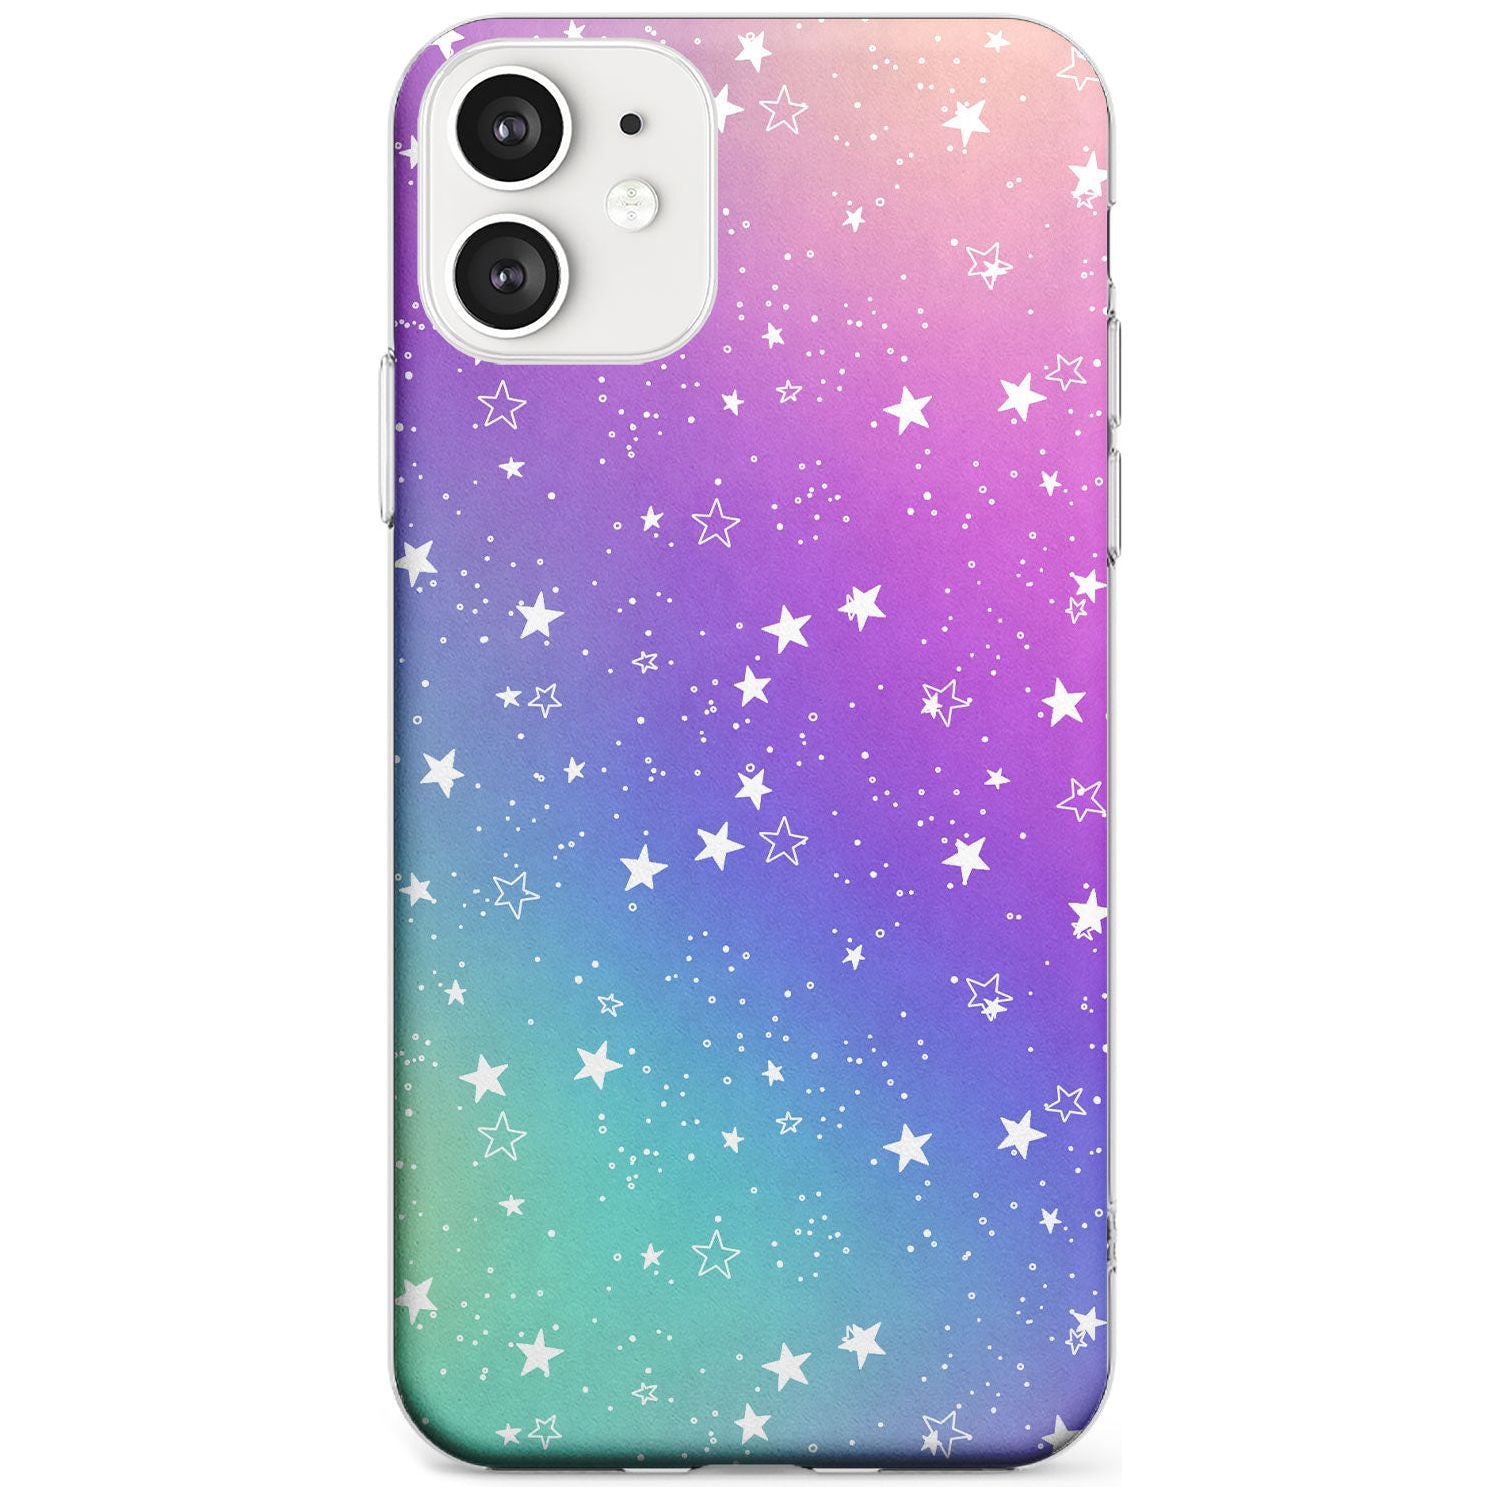 White Stars on Pastels Black Impact Phone Case for iPhone 11